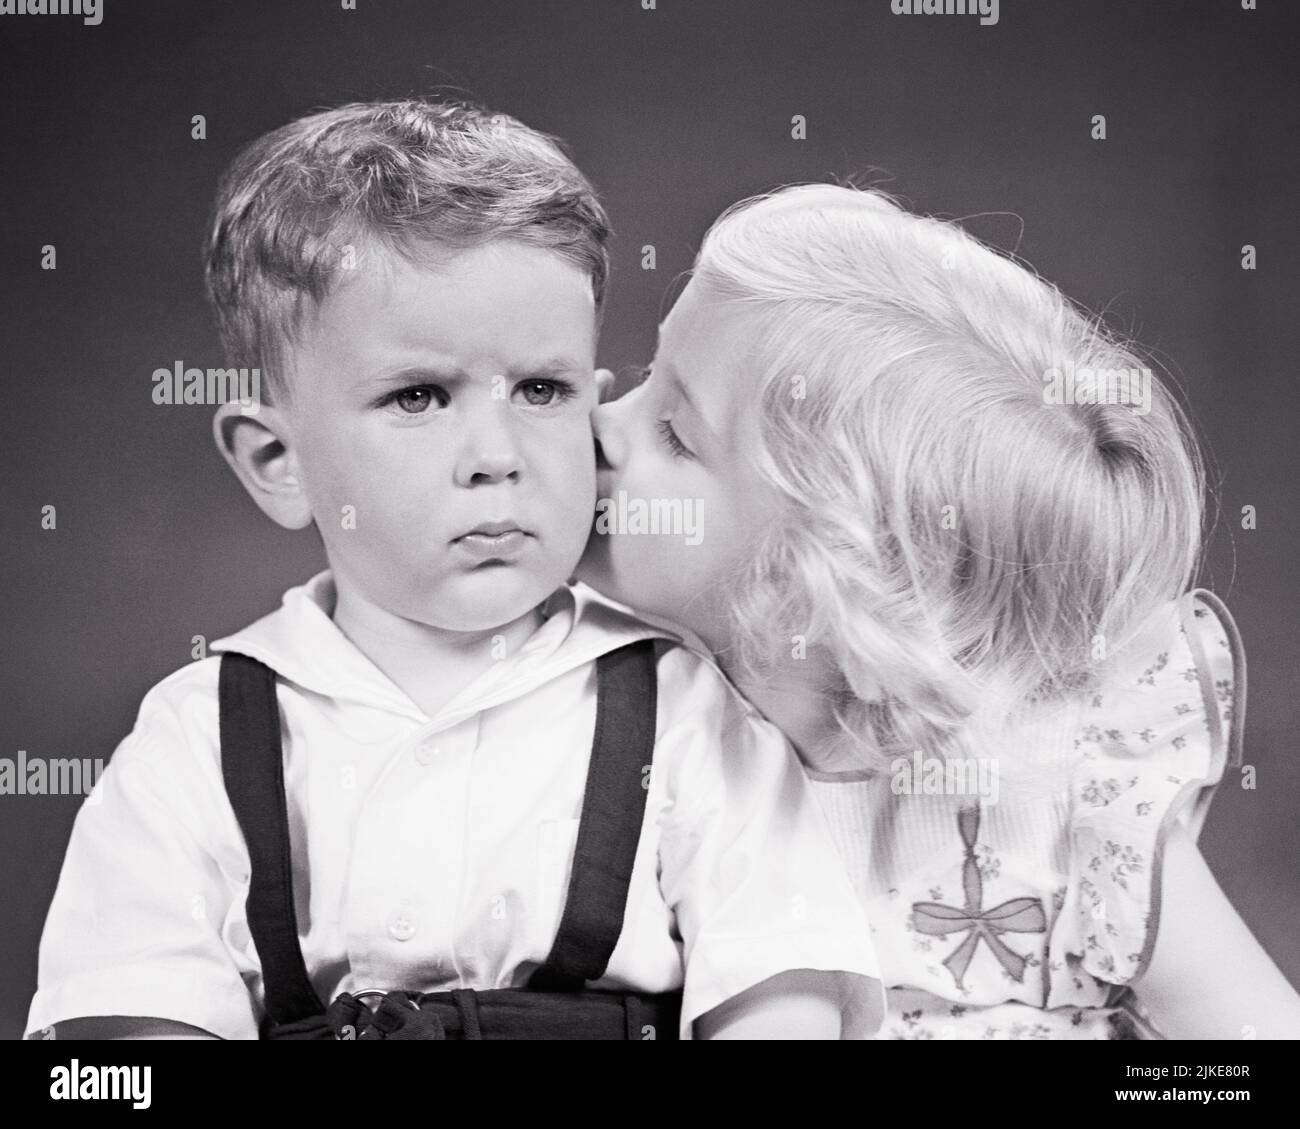 1940s LITTLE BLONDE GIRL KISSING HER SAD GRUMPY BABY BROTHER ON THE CHEEK - j3827 HAR001 HARS WORRY STRONG FAMILIES LIFESTYLE FEMALES BROTHERS STUDIO SHOT MOODY HOME LIFE COPY SPACE FRIENDSHIP HALF-LENGTH PERSONS CARING MALES SIBLINGS SISTERS TROUBLED B&W CONCERNED SADNESS MOOD SIBLING CONNECTION CONCEPTUAL GLUM FRIENDLY BABY BOY PERSONAL ATTACHMENT AFFECTION EMOTION GROWTH MISERABLE PECK SMOOCH TOGETHERNESS BLACK AND WHITE CAUCASIAN ETHNICITY HAR001 OLD FASHIONED Stock Photo